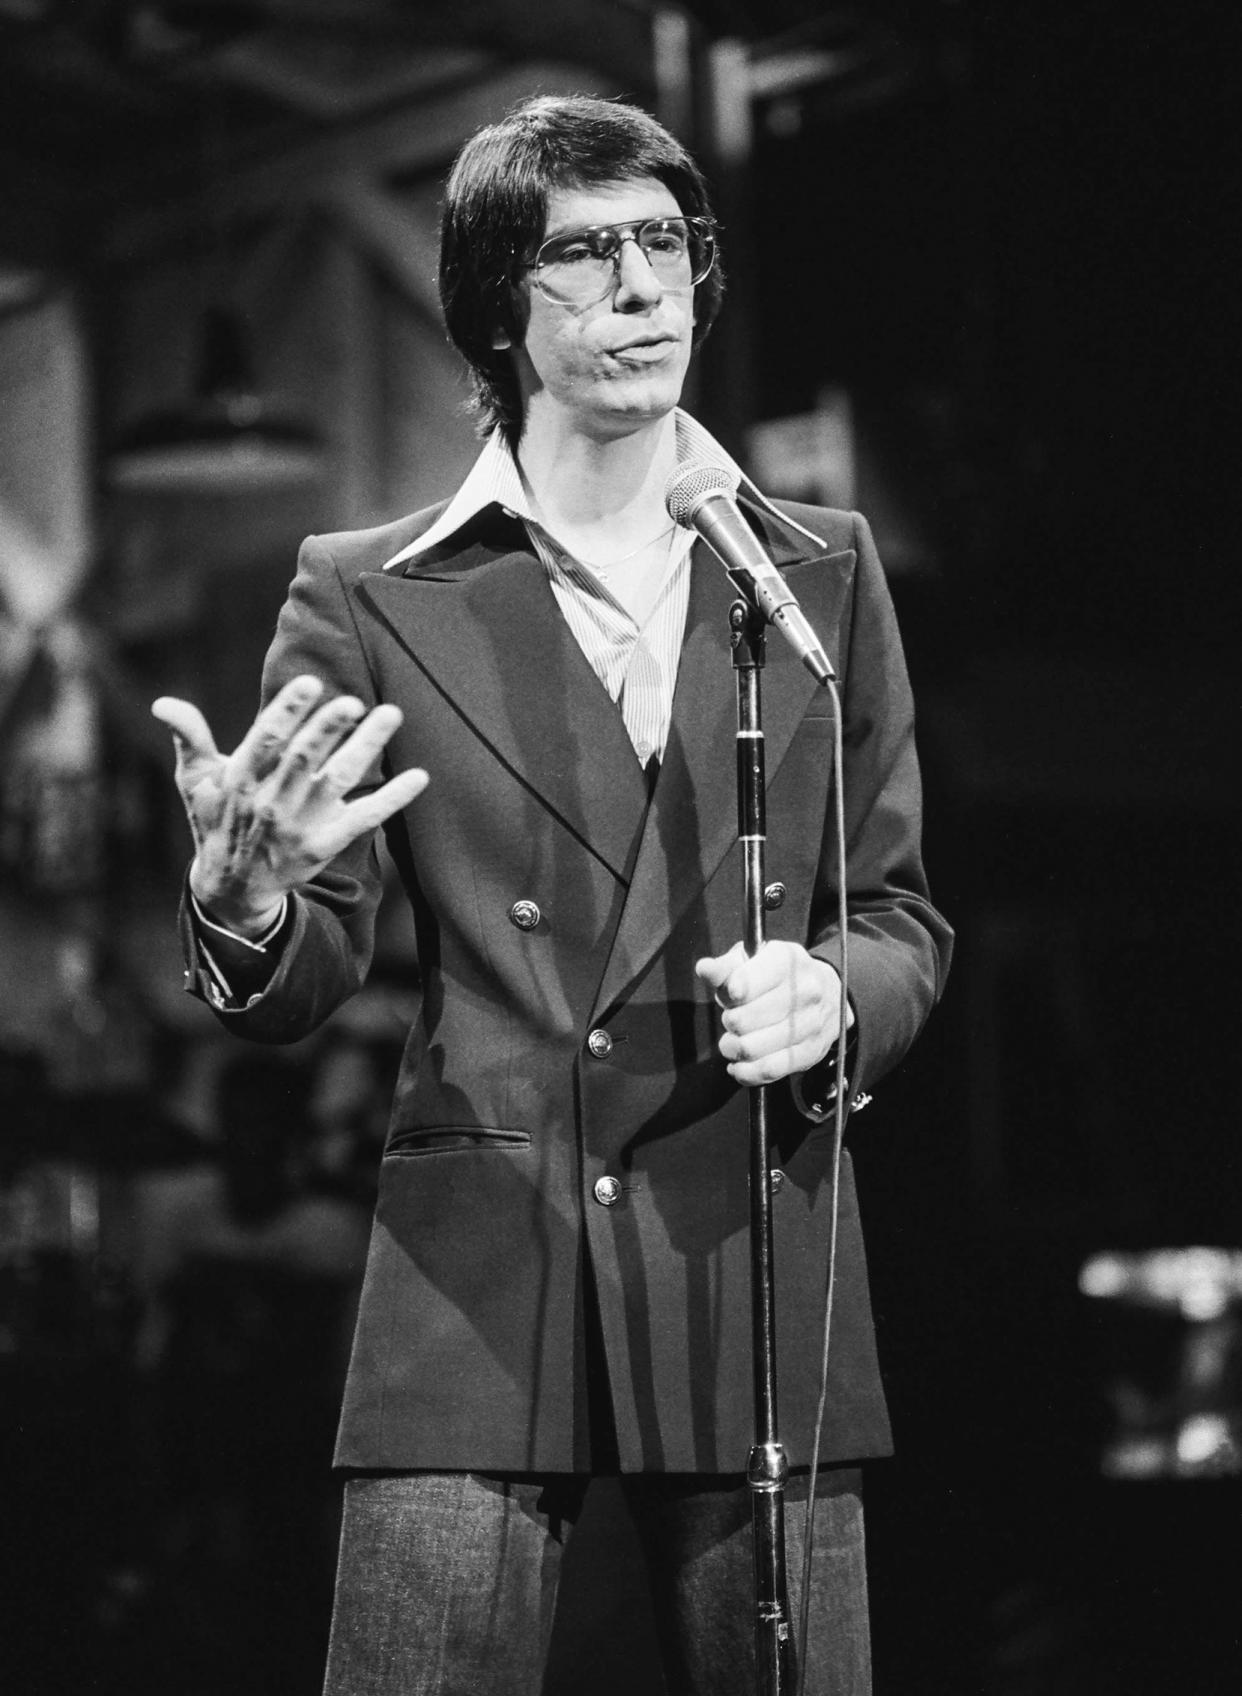 Richard Belzer during a guest performance on Saturday Night Live on March 25, 1978. (NBC)